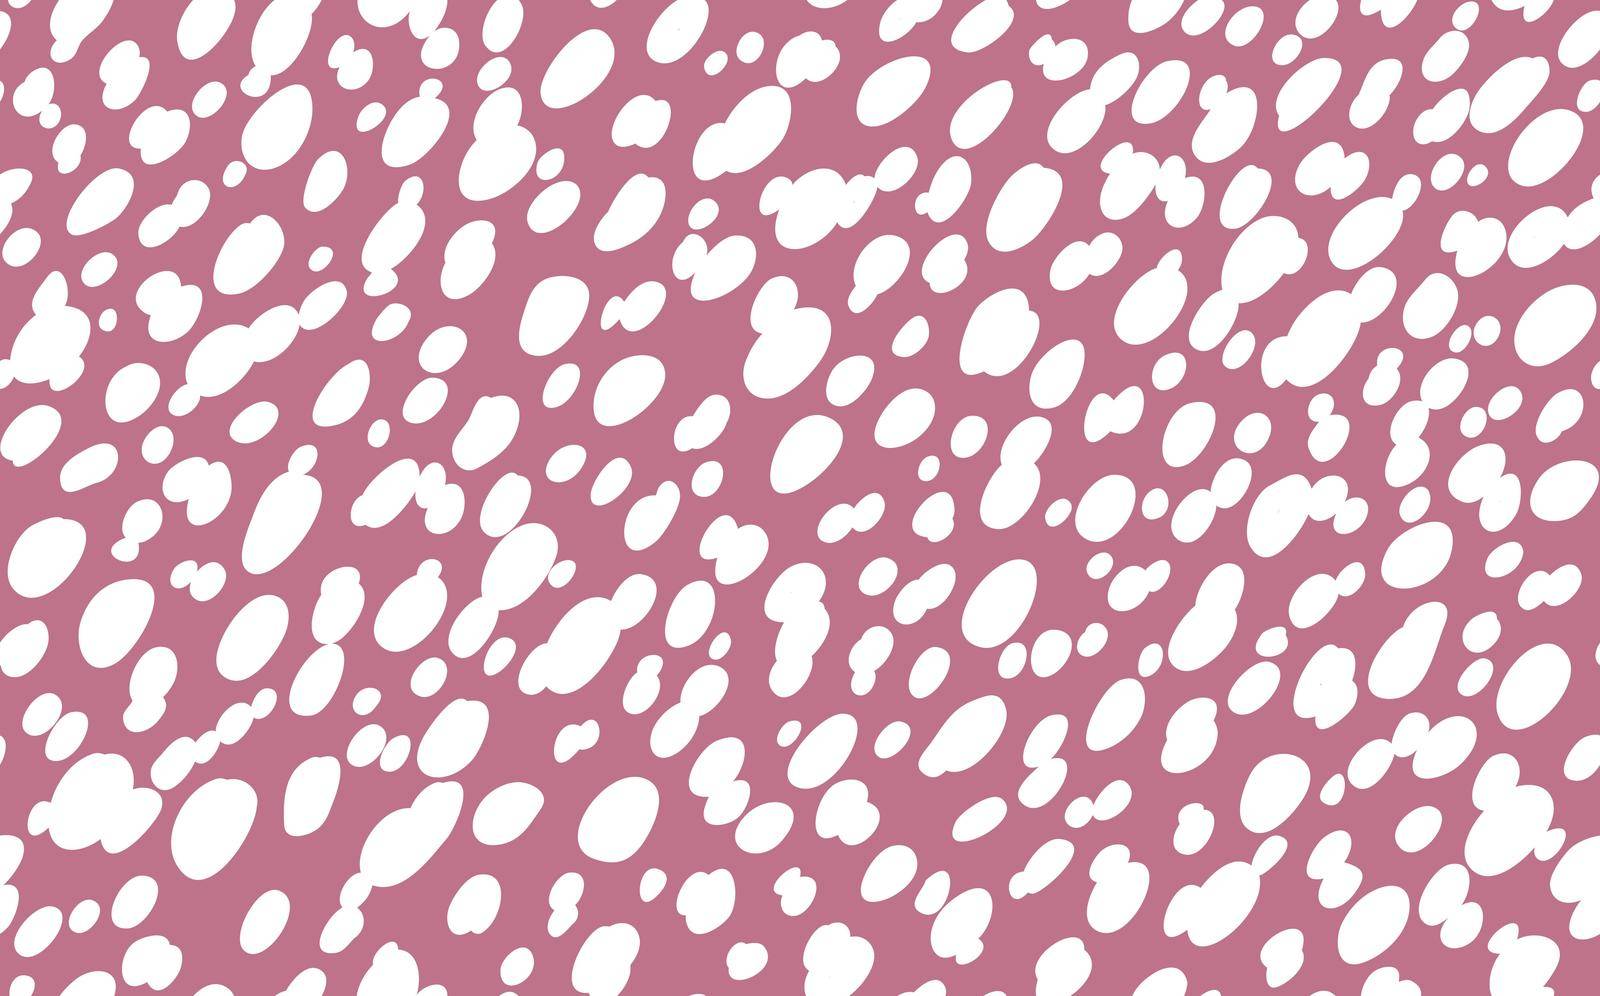 Abstract modern leopard seamless pattern. Animals trendy background. Pink and white decorative vector stock illustration for print, card, postcard, fabric, textile. Modern ornament of stylized skin by allaku